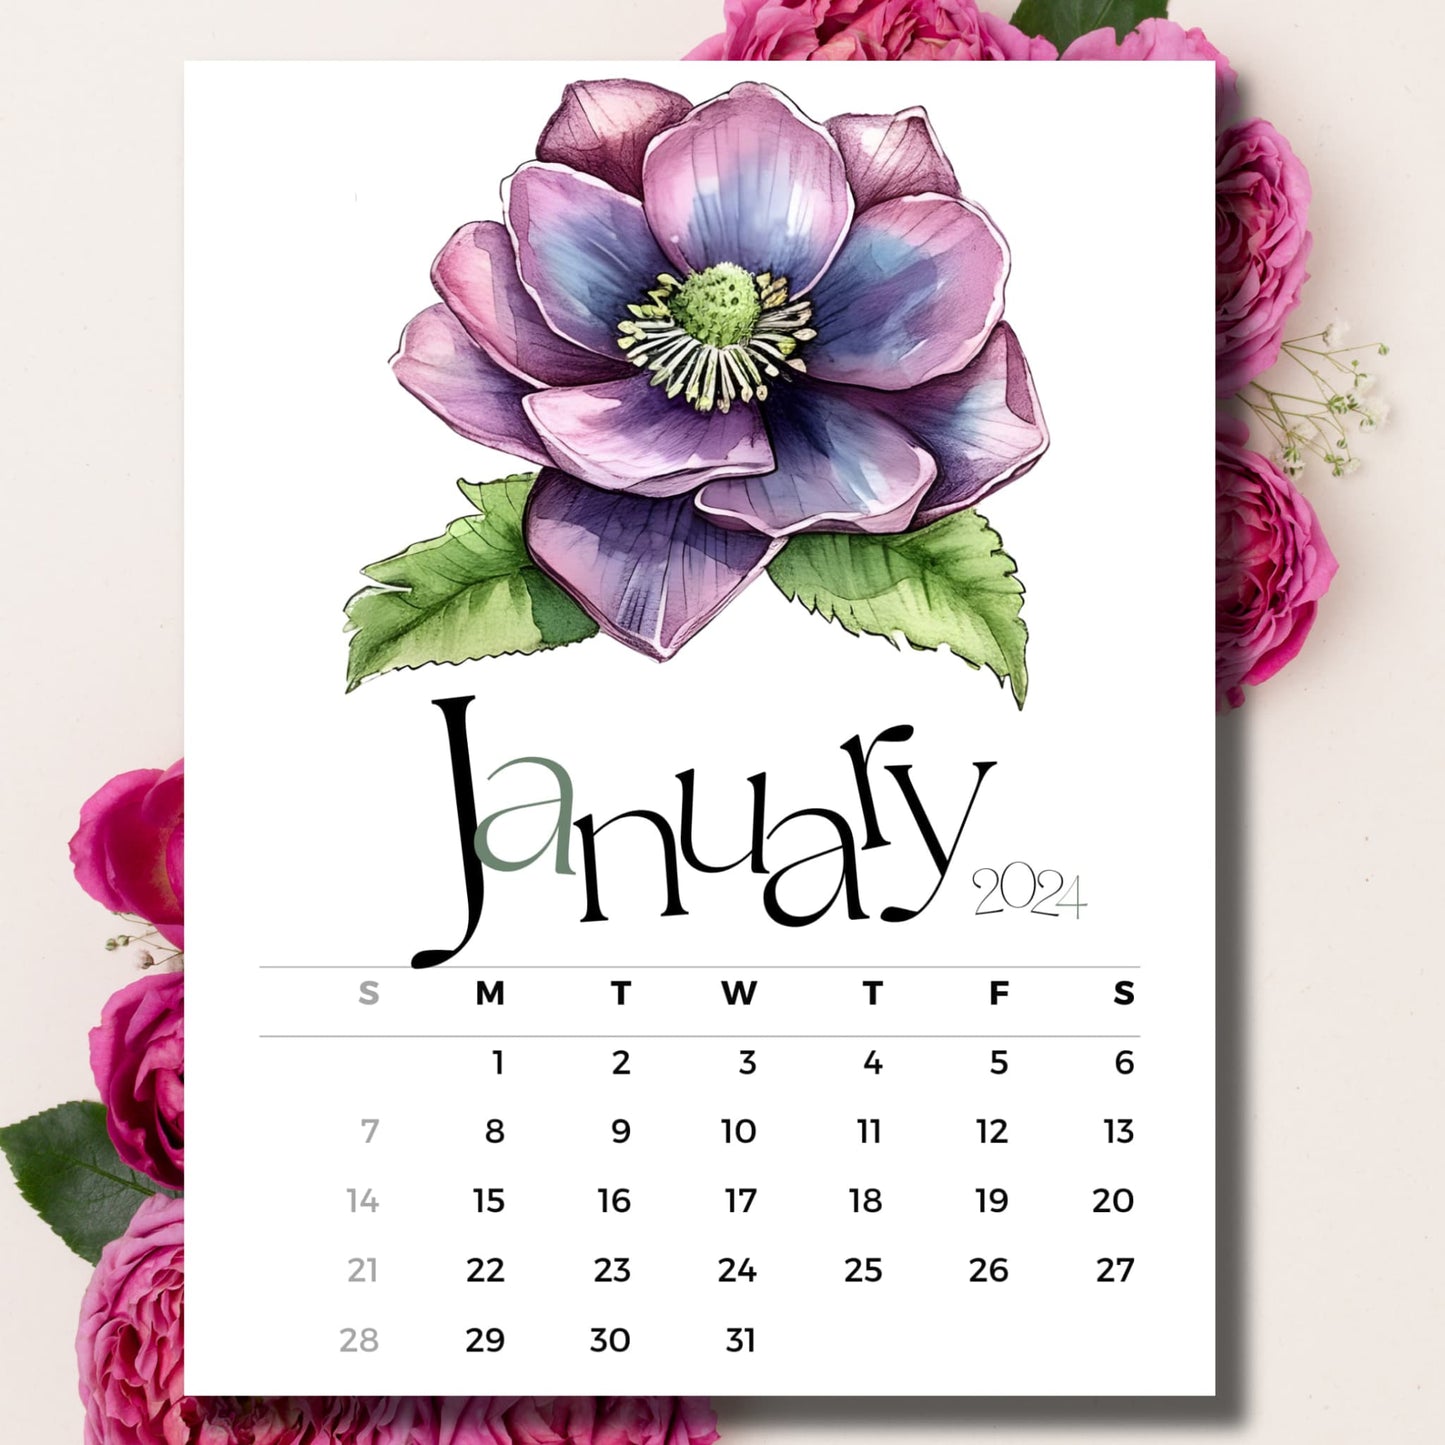 January 2024 Hellebores floral calendar on beige background with pink peonies.